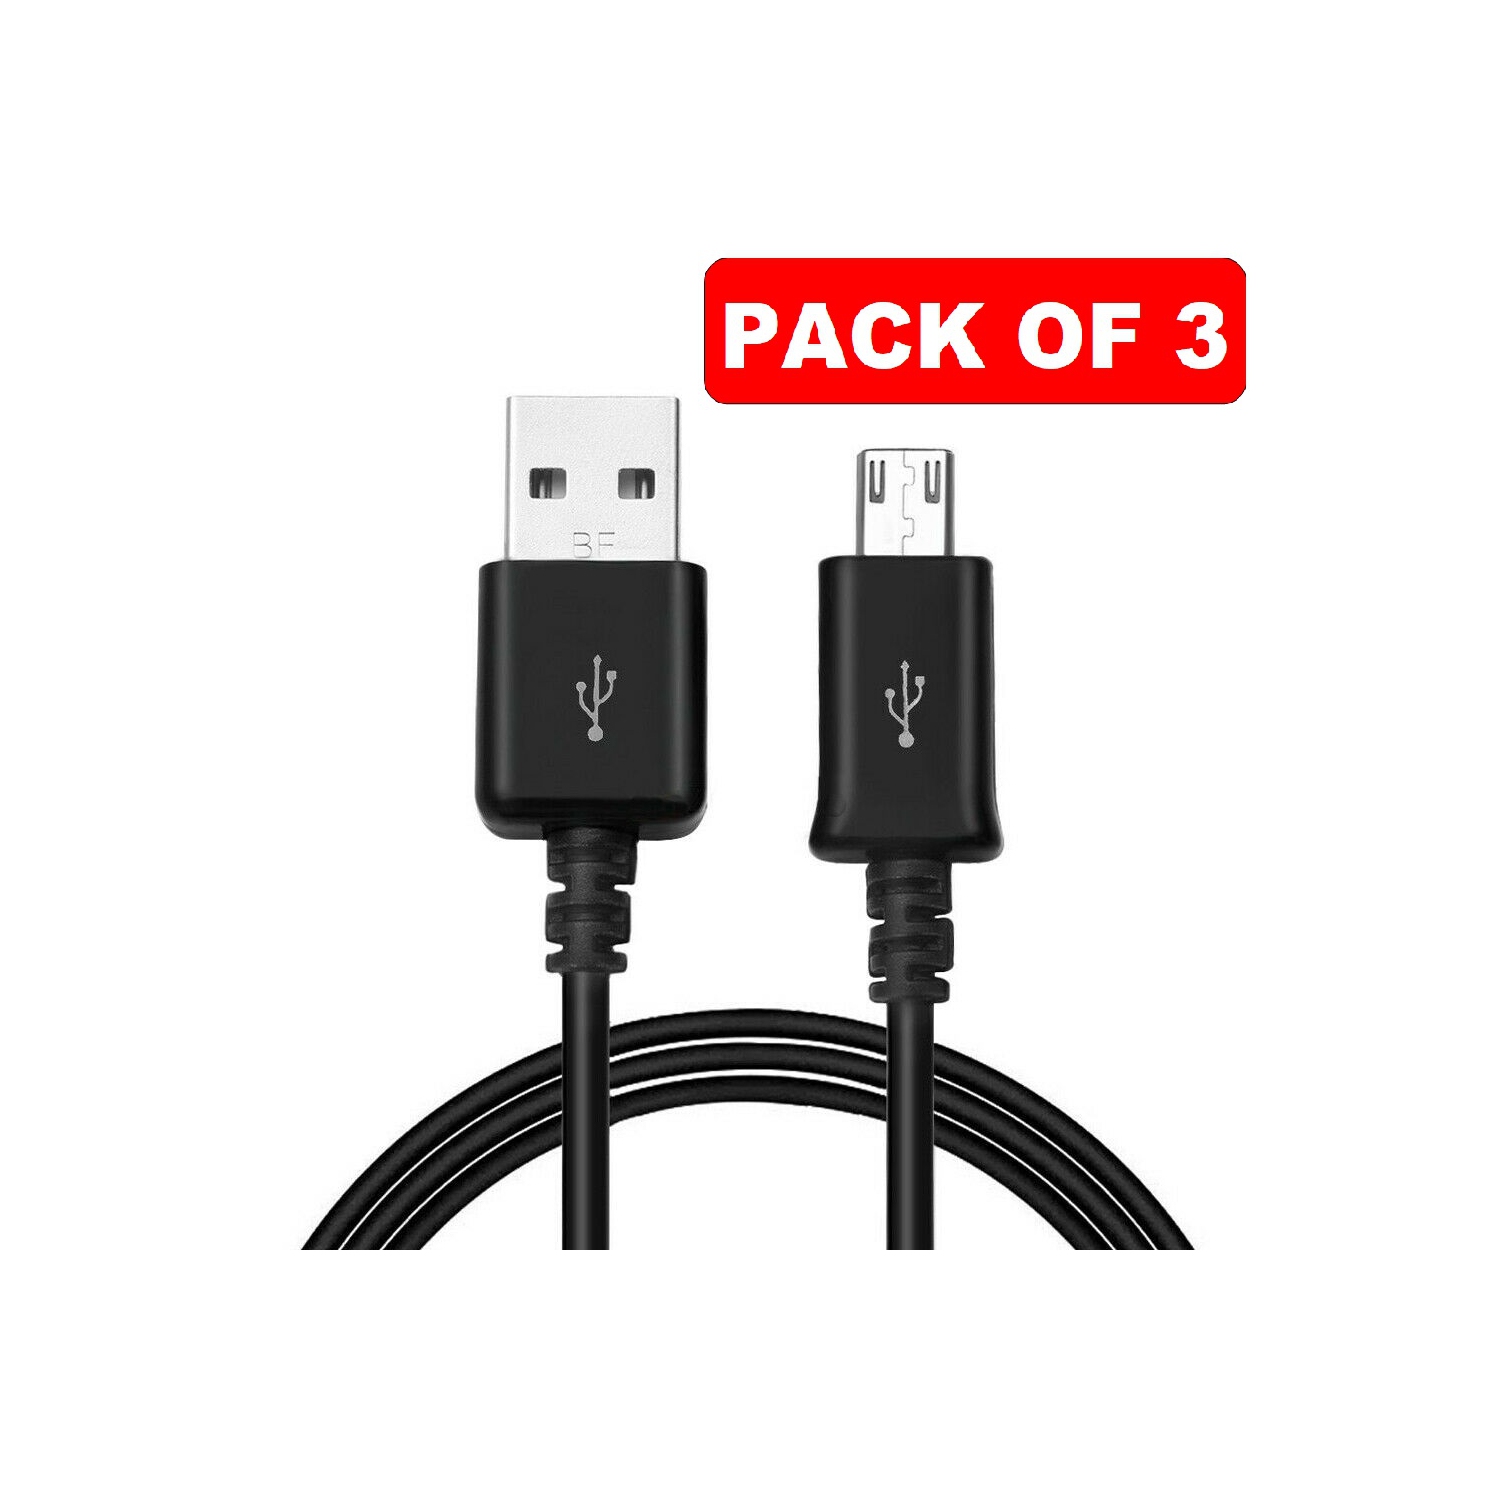 3x Micro USB Charging Cable 3ft For Samsung LG Android All Micro USB interface device(Black)